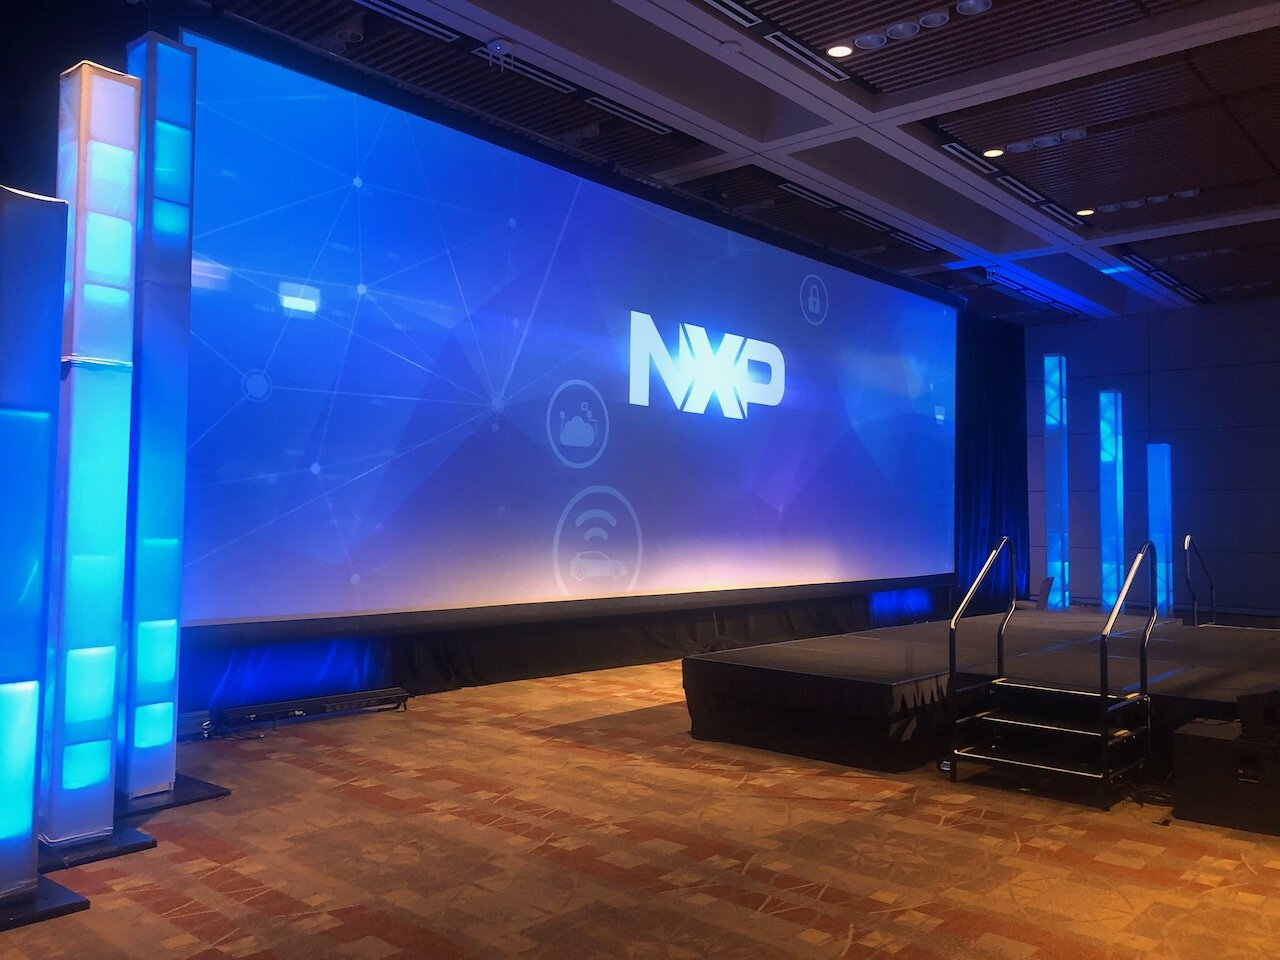 NXP Connect 2019